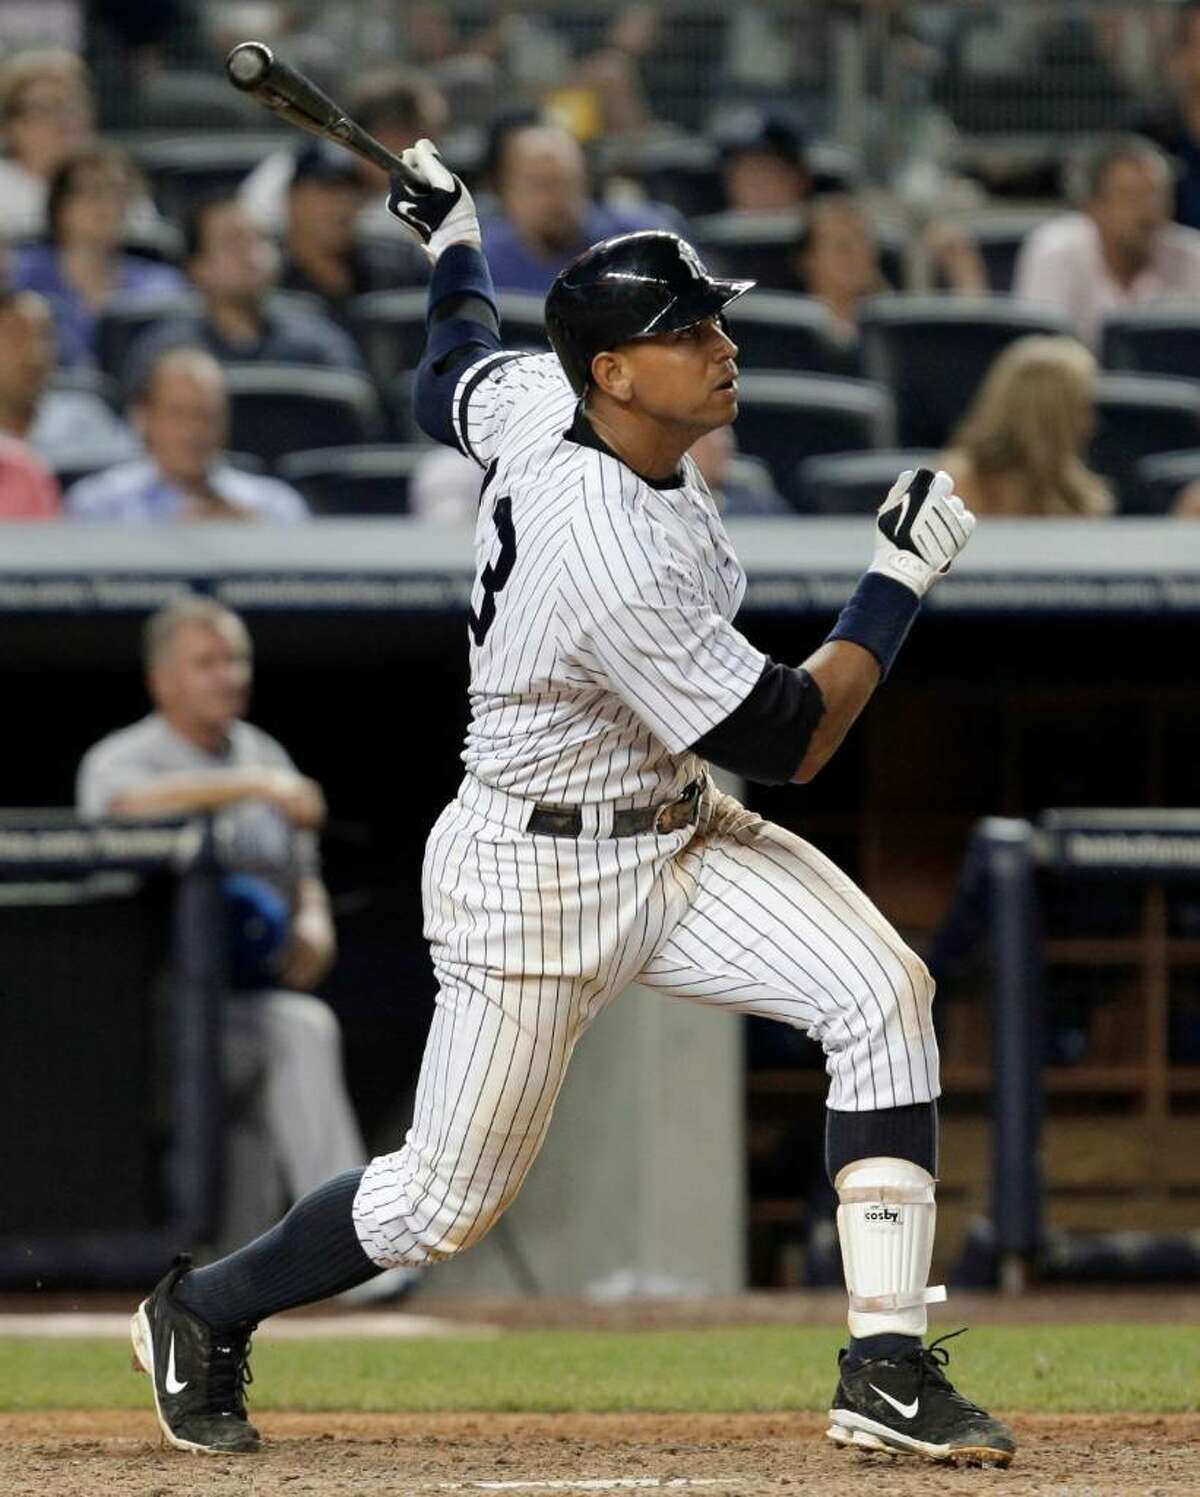 New York Yankees Alex Rodriguez watches his 599th career home run, in the seventh inning off Kansas City Royals reliever Robinson Tejada, in a baseball game at Yankee Stadium on Thursday, July 22, 2010 in New York. (AP Photo/Kathy Willens)